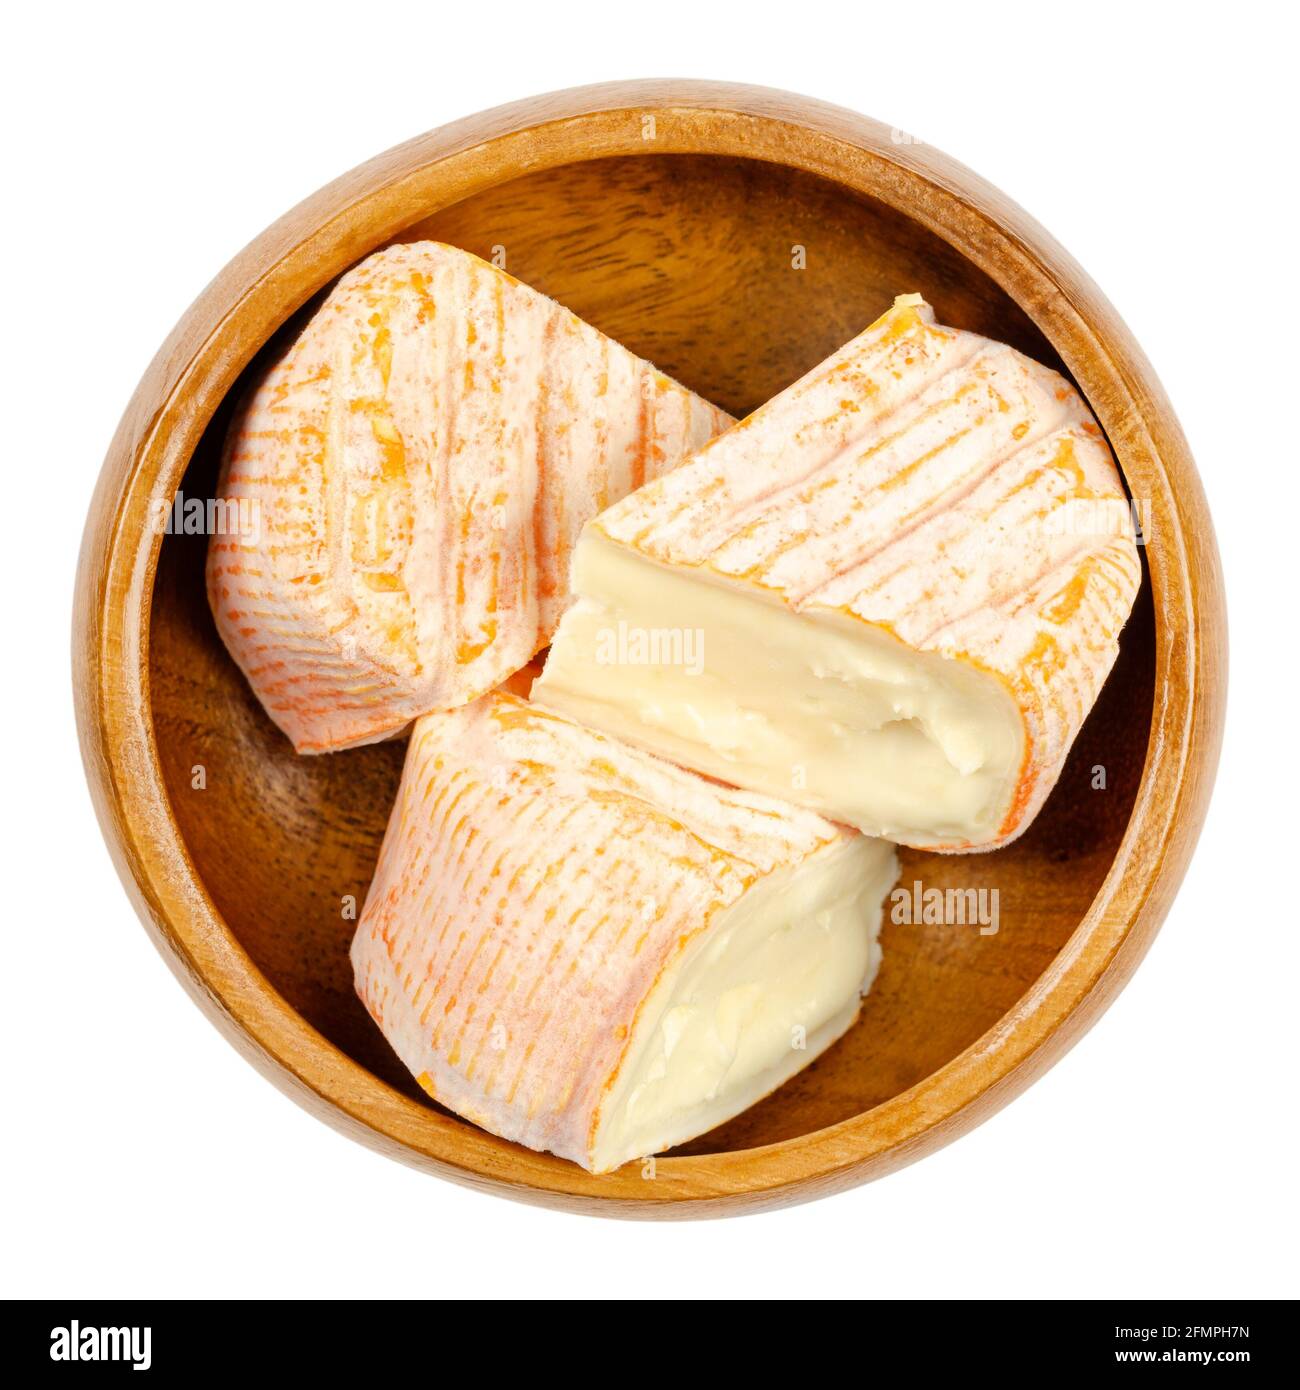 French soft cheese triangles, in a wooden bowl. Saint Albray, a cheese from the Aquitaine region of France, similar to Camembert. Stock Photo